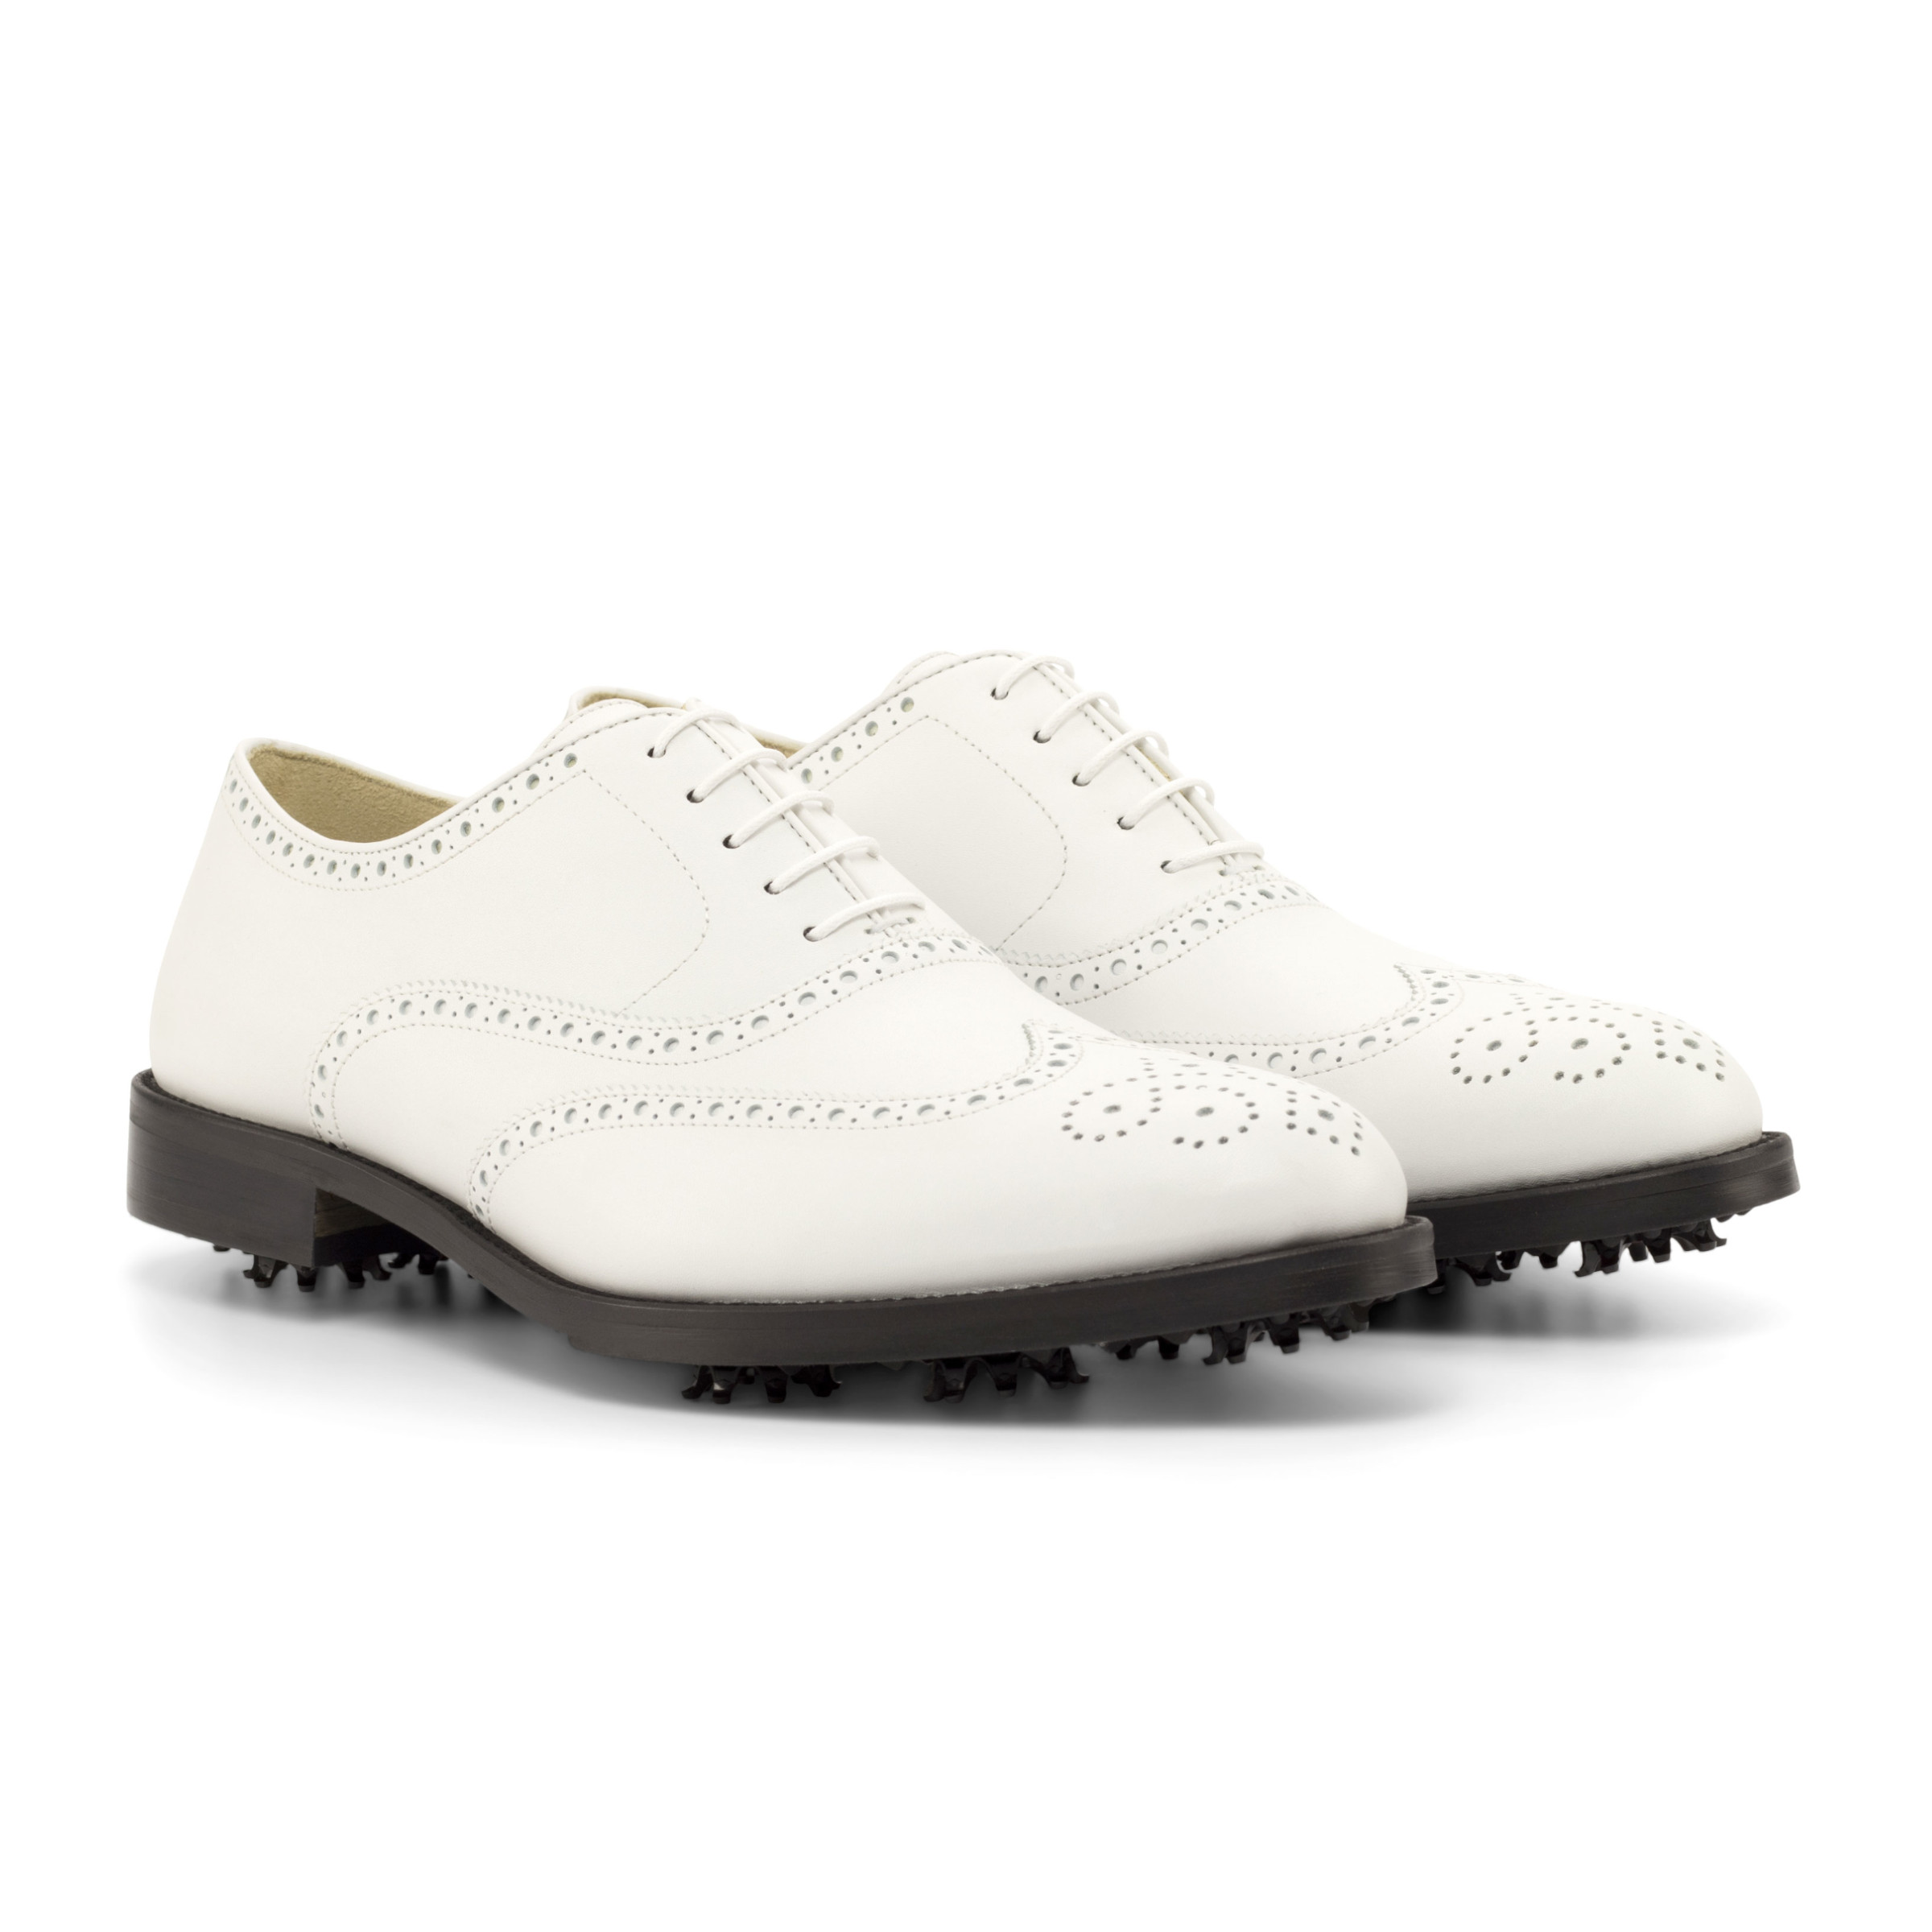 The Brogue Golf Shoe: White. White Box calf leather golf shoes with toe embellishments on a white background